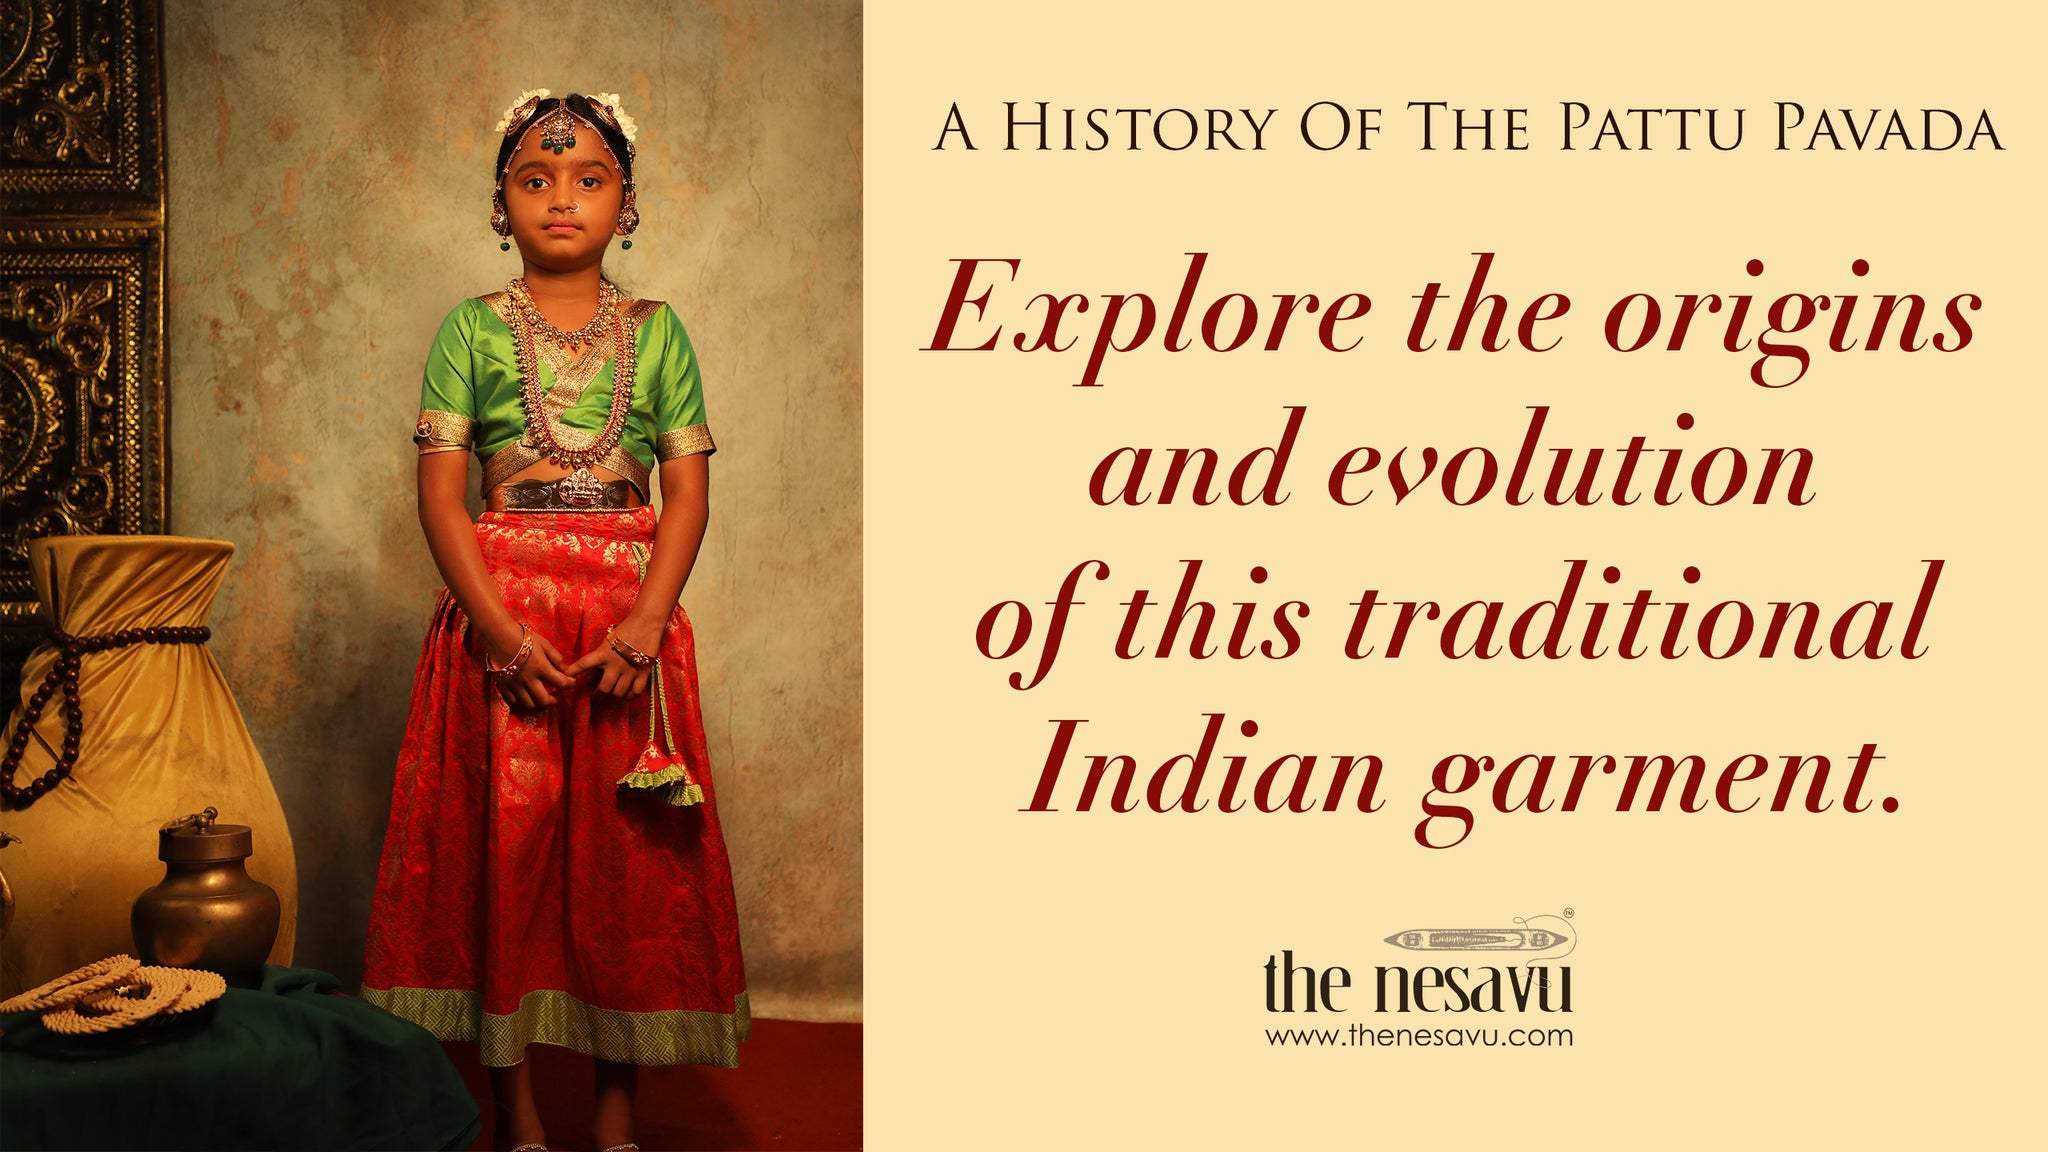 Nesavu Brand A history of the pattu pavada: Explore the origins and evolution of this traditional Indian garment.